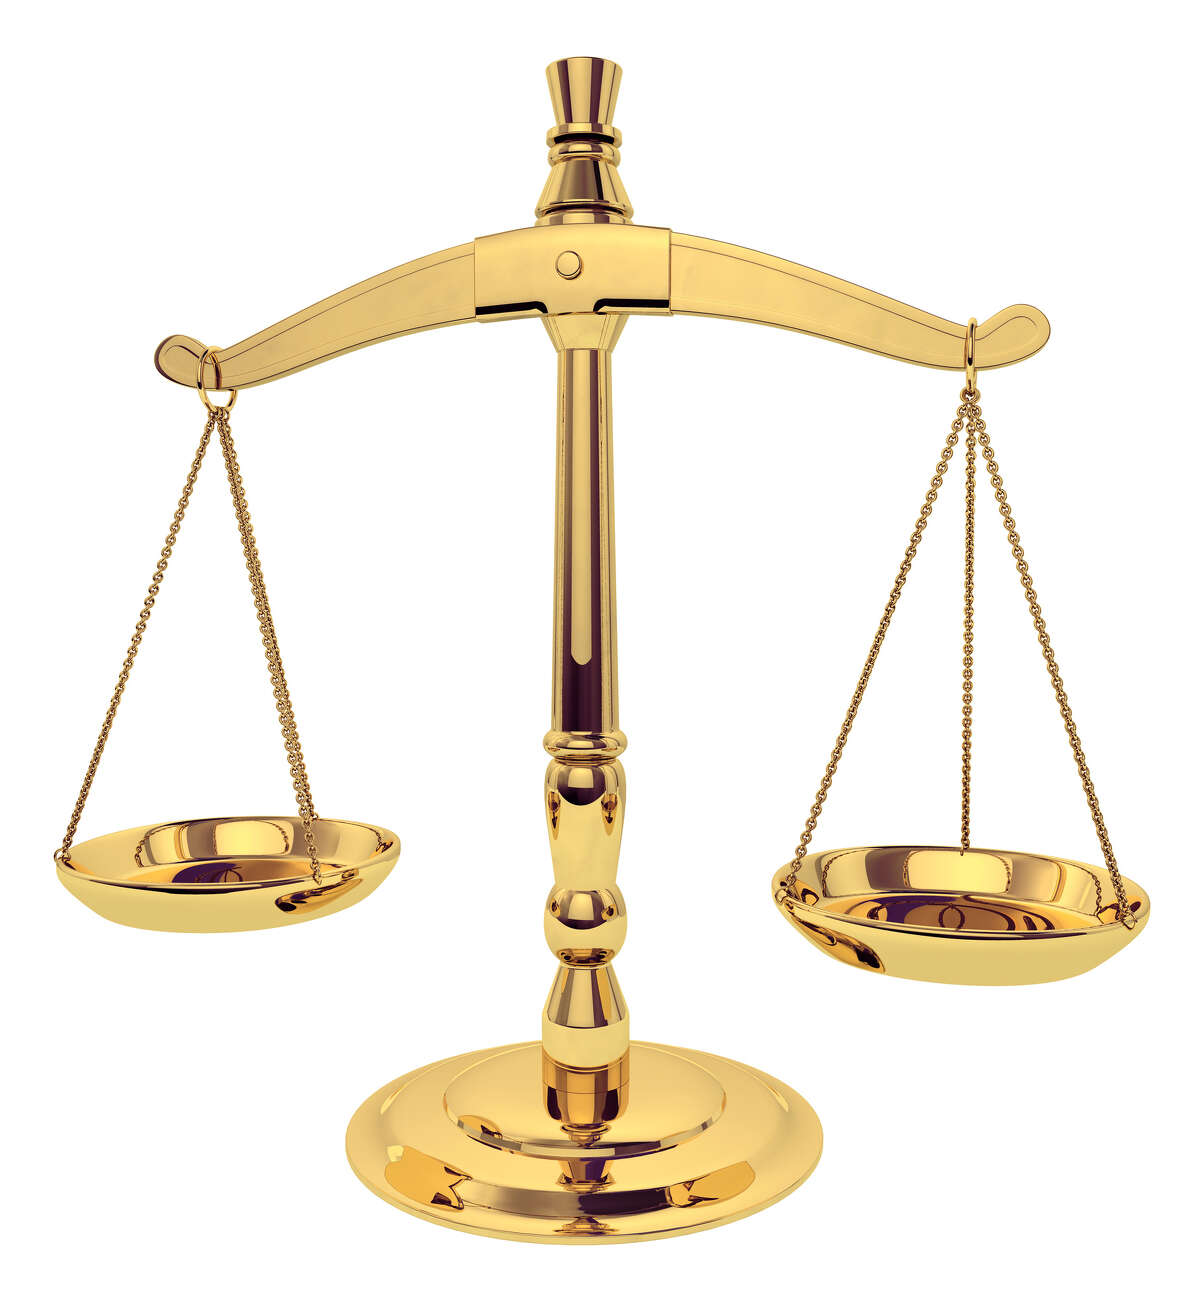 Brass Scales of Justice over white